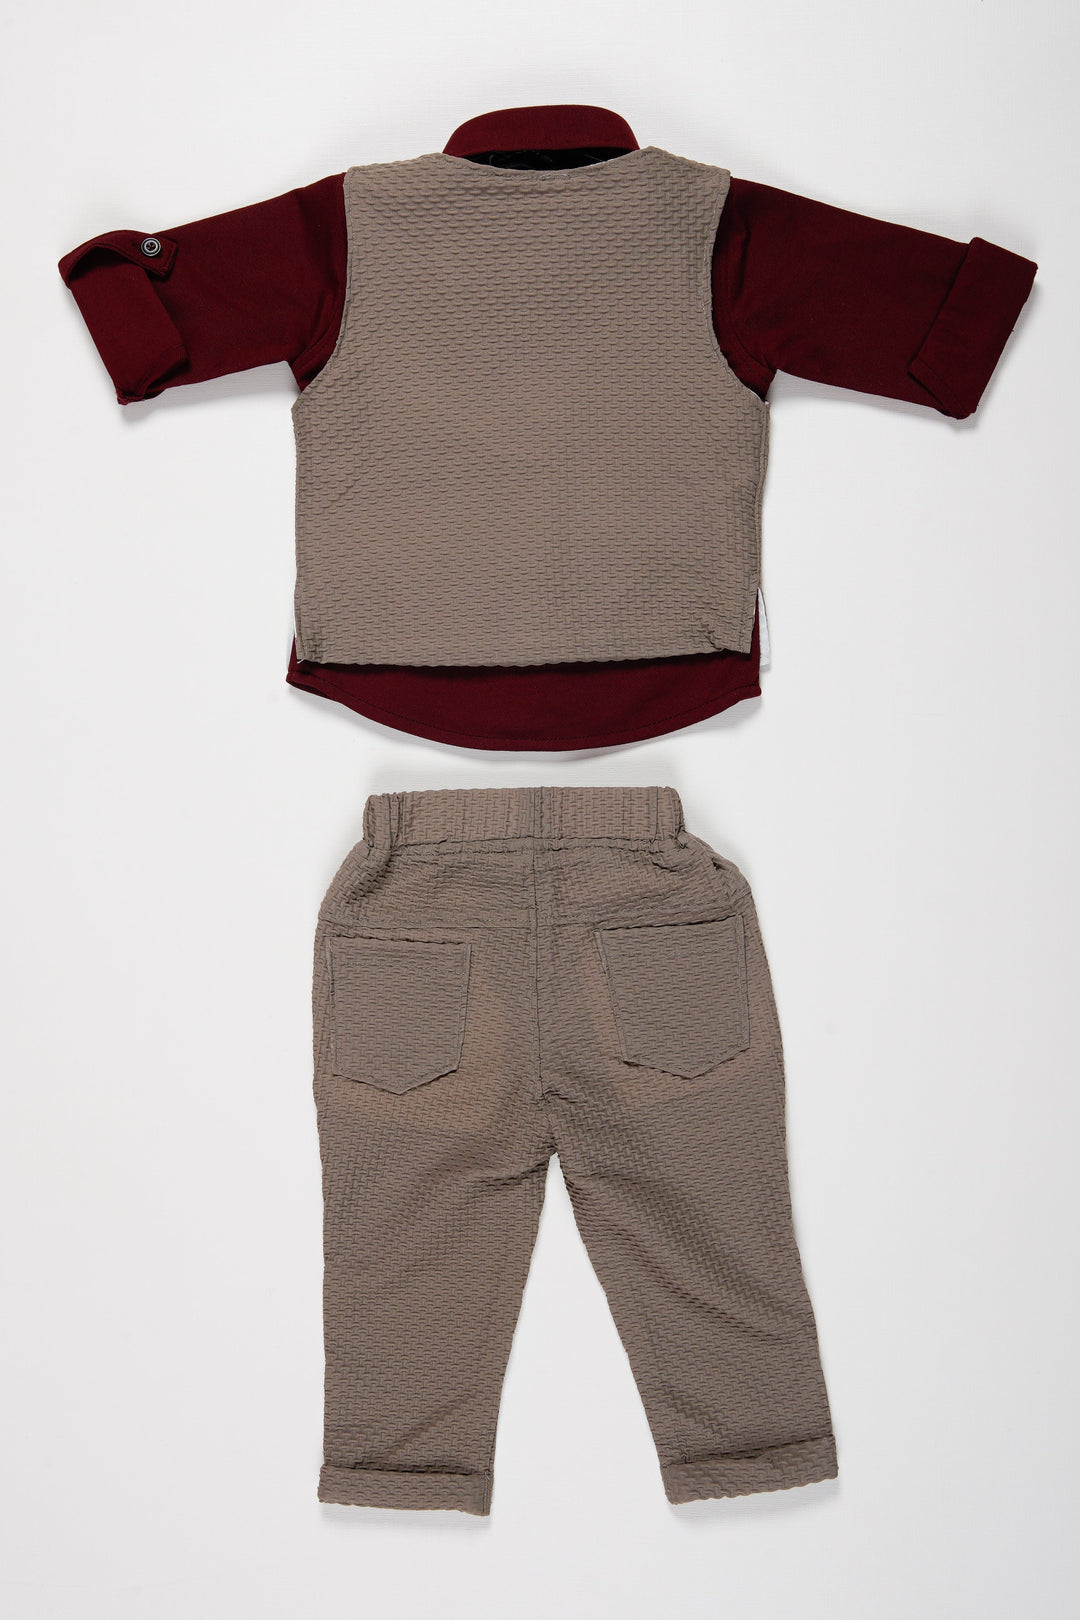 The Nesavu Boys Casual Set Boys Tailored Vest Suit Set with Contrast Trousers and Bow Tie Nesavu Boys Olive and Maroon Formal Suit Set | Stylish Vest and Trousers | The Nesavu